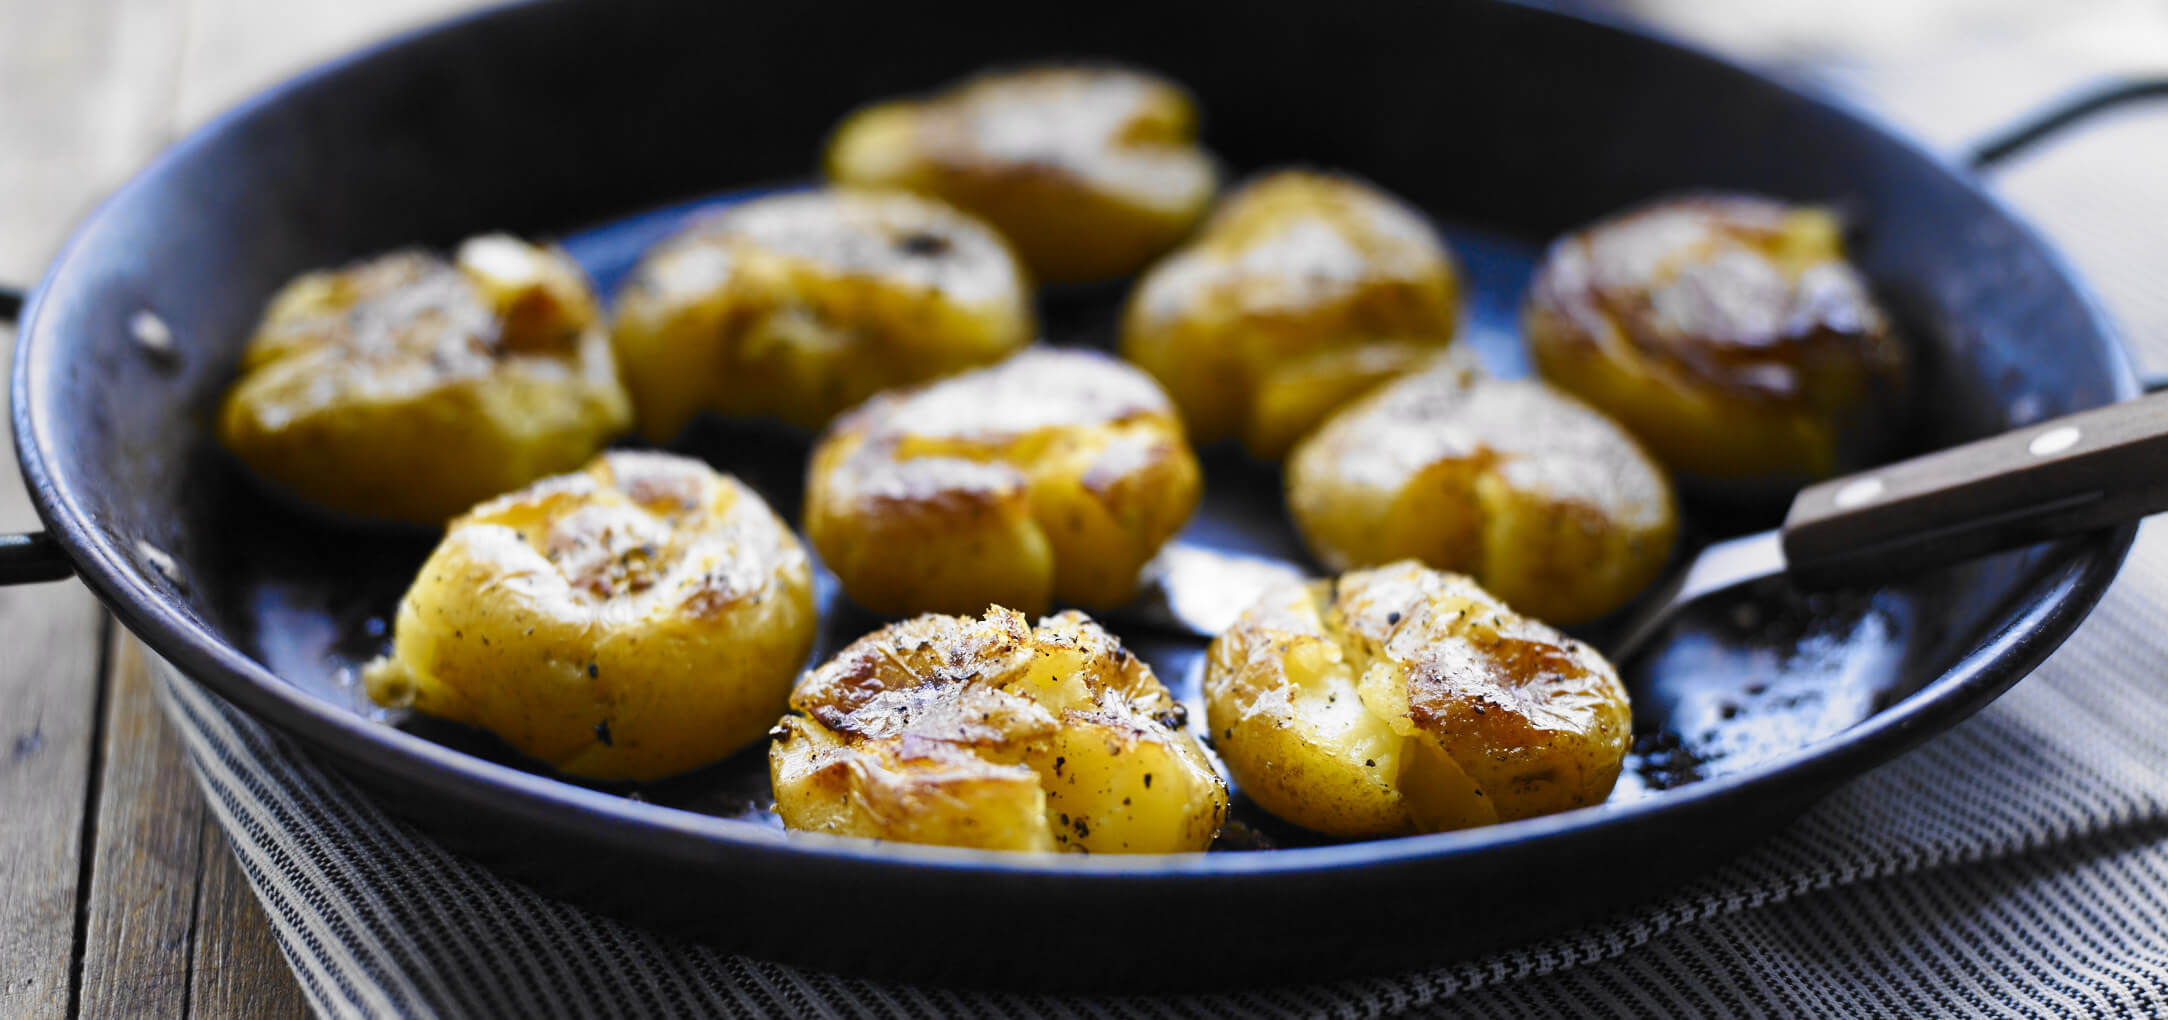 Simply smashing potatoes in a cast-iron skillet.